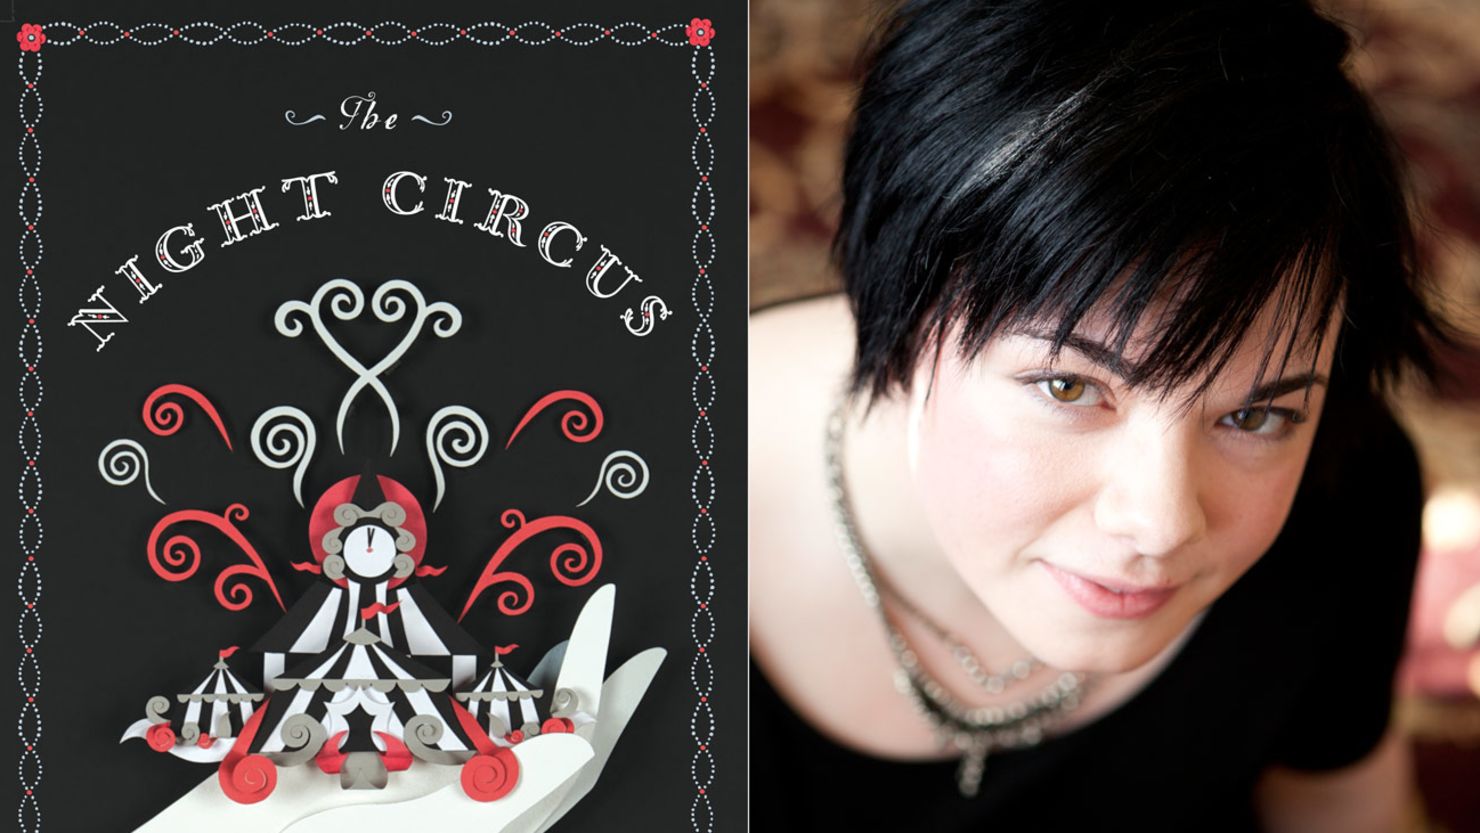 Erin Morgenstern's book, "The Night Circus" has fans and publishers excited.